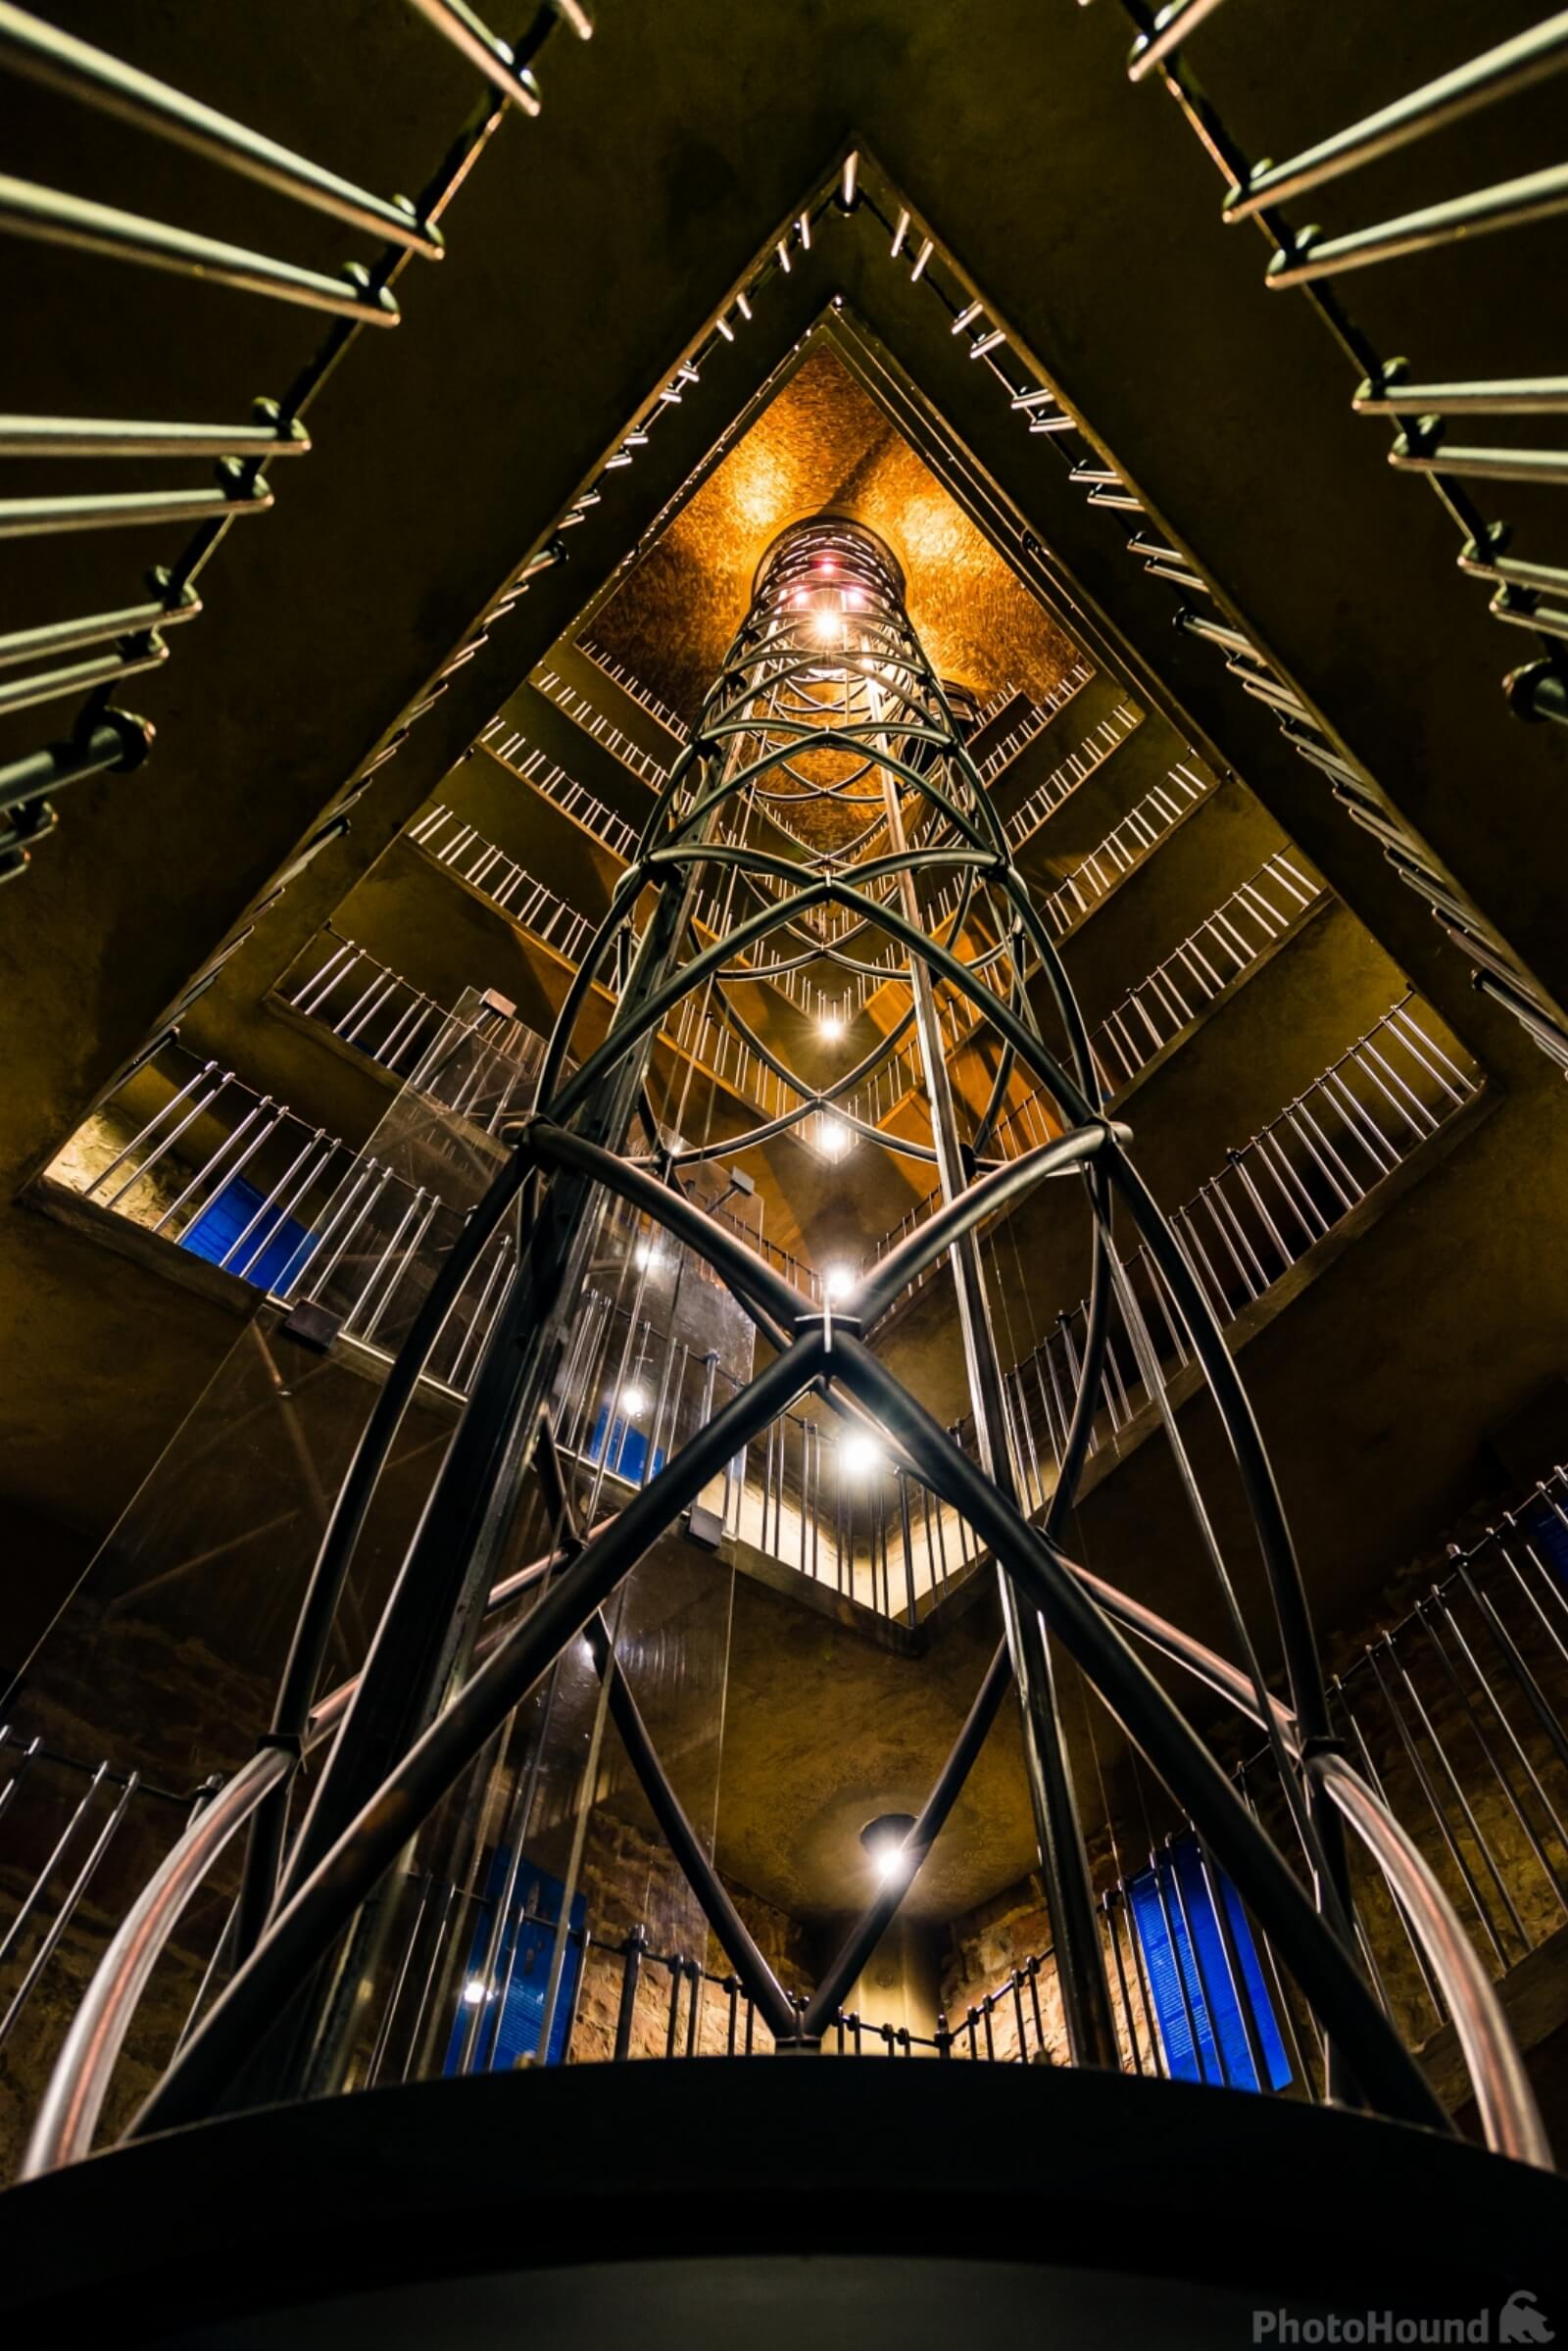 Image of The lift in the Old Town Square Tower by VOJTa Herout